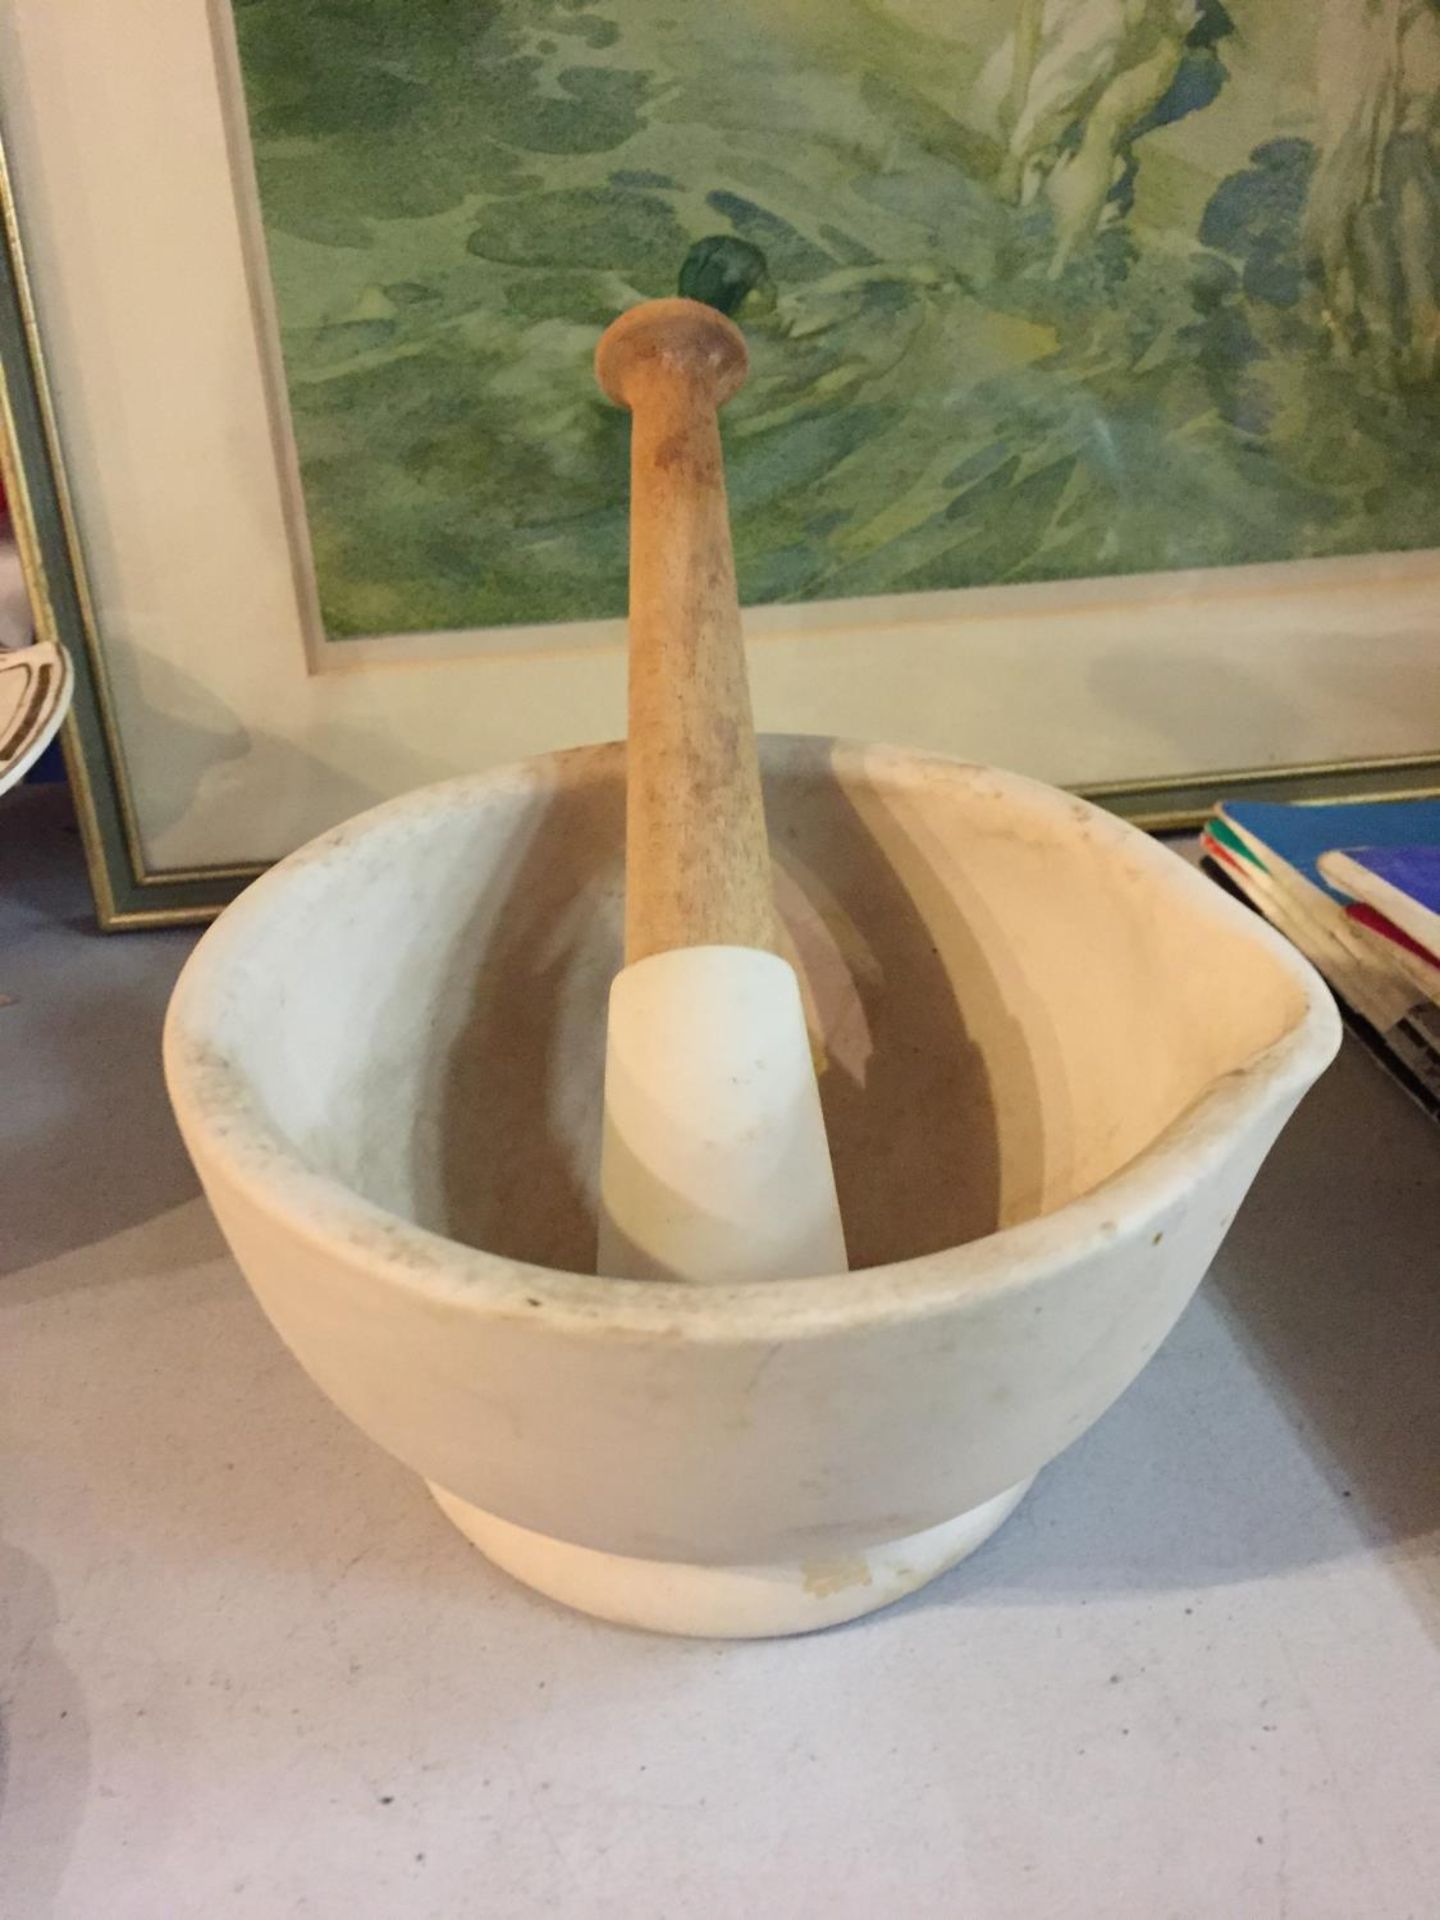 AN ANTIQUE MILTON AND BROOK APOTHECARY ACID PROOF PESTLE AND MORTAR. MADE IN ENGLAND - Image 2 of 6